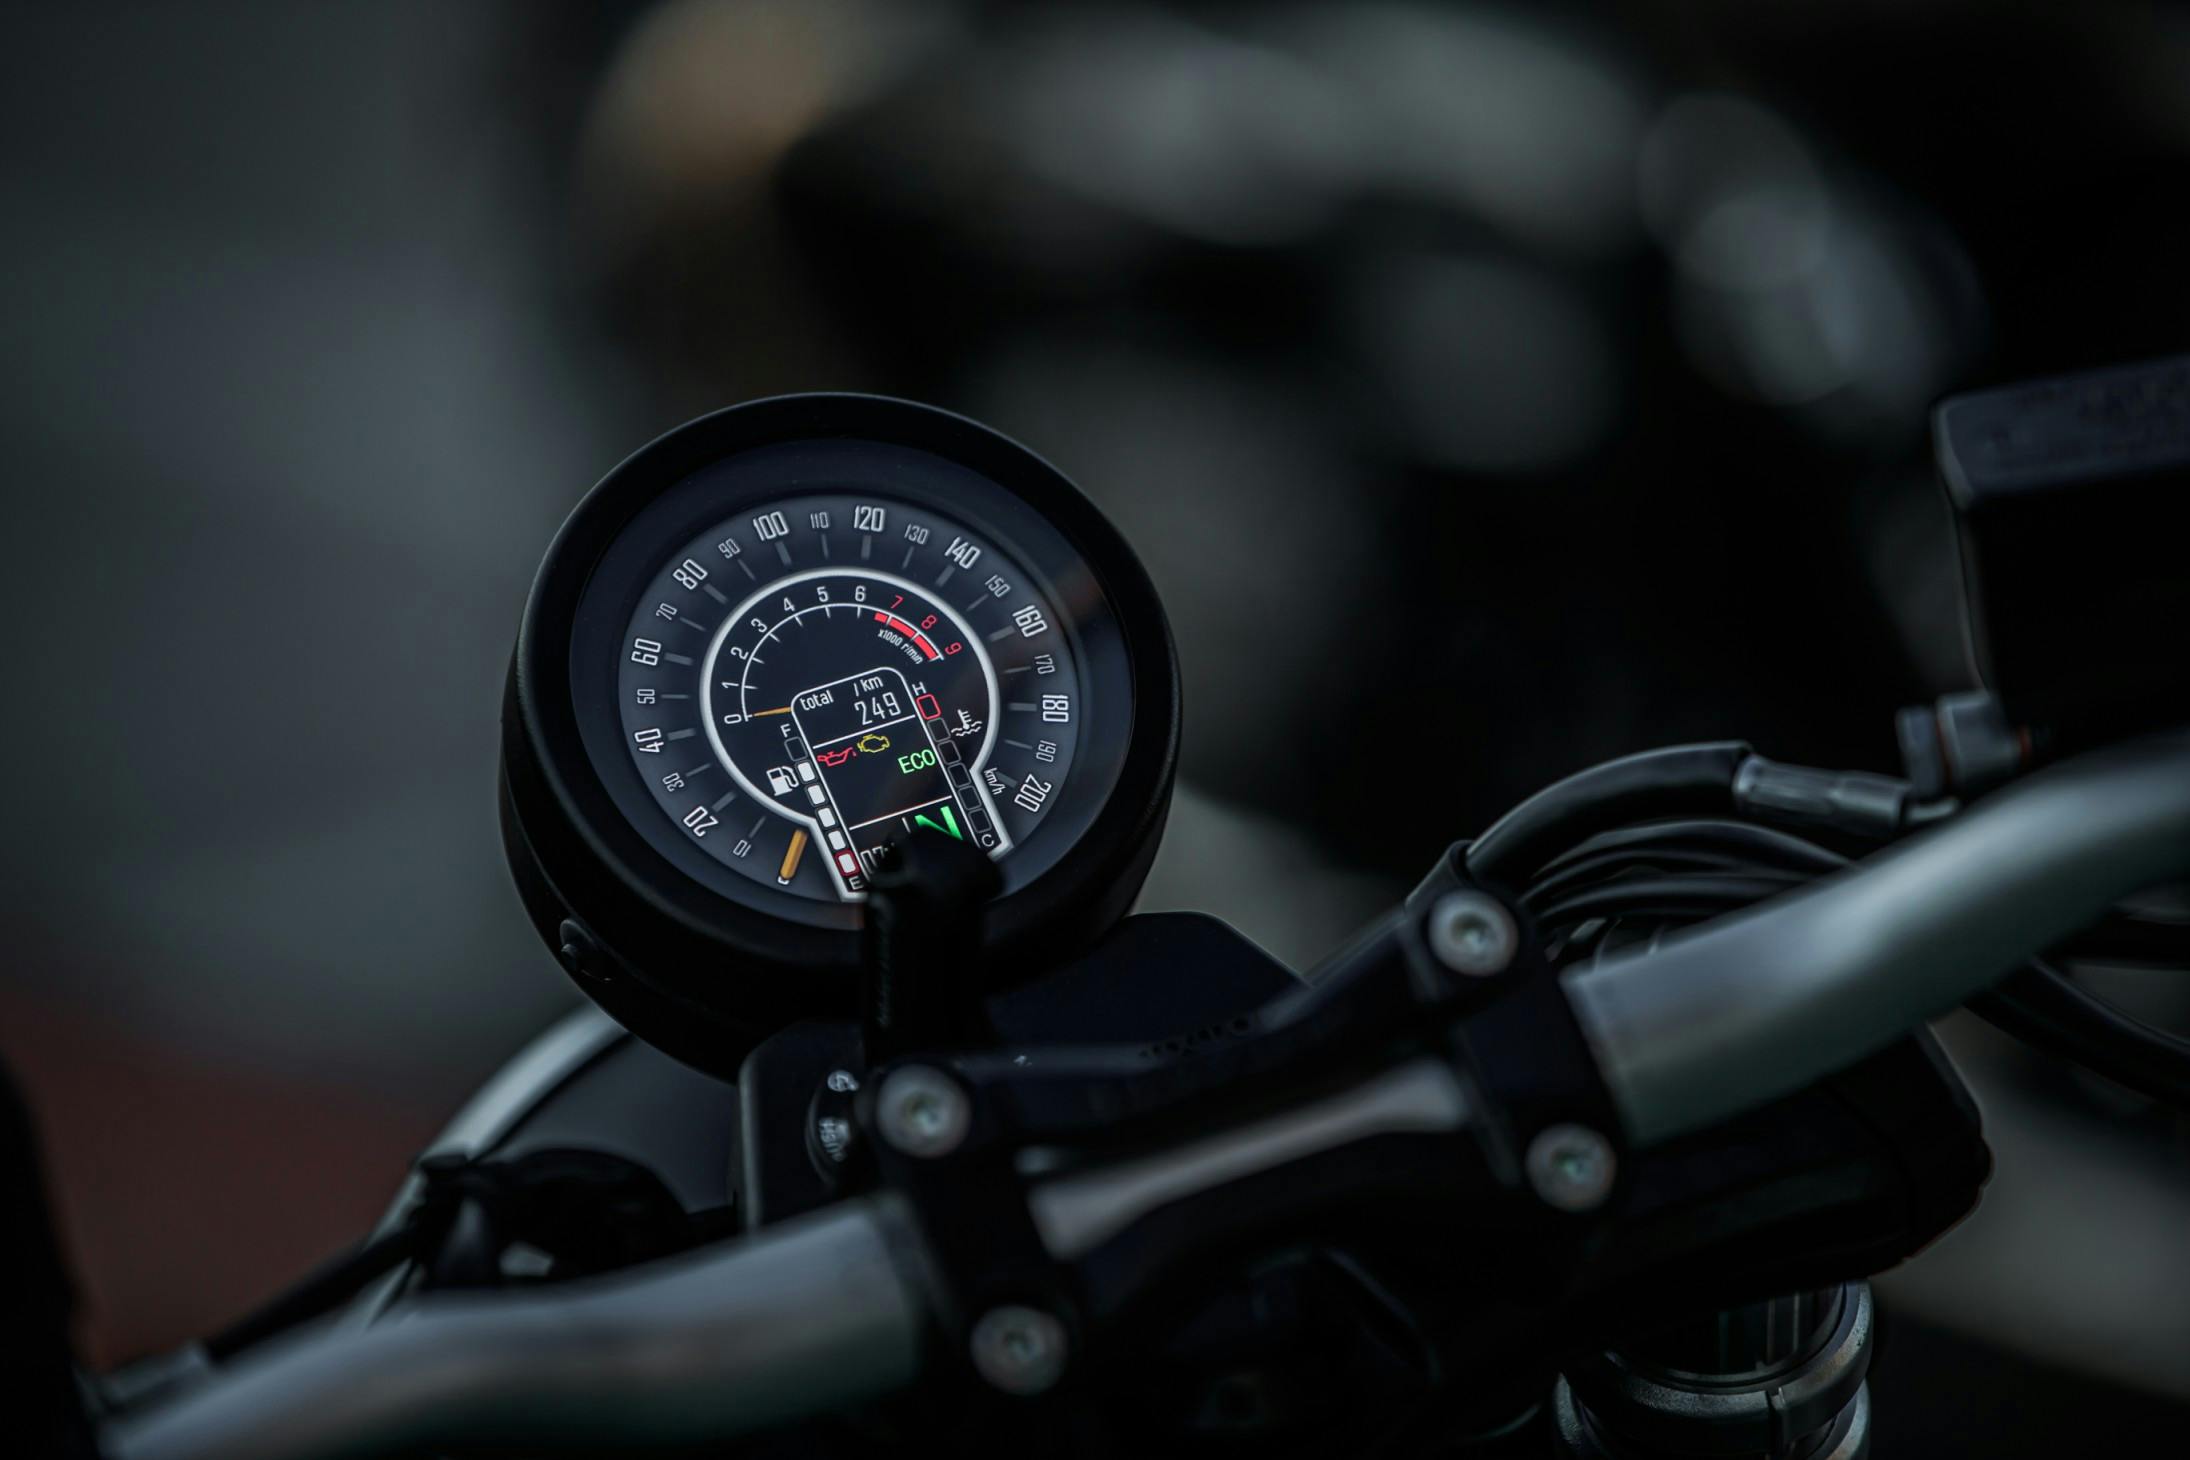 Close-up of the tachometer and display of a Brixton Cromwell 1200 motorcycle